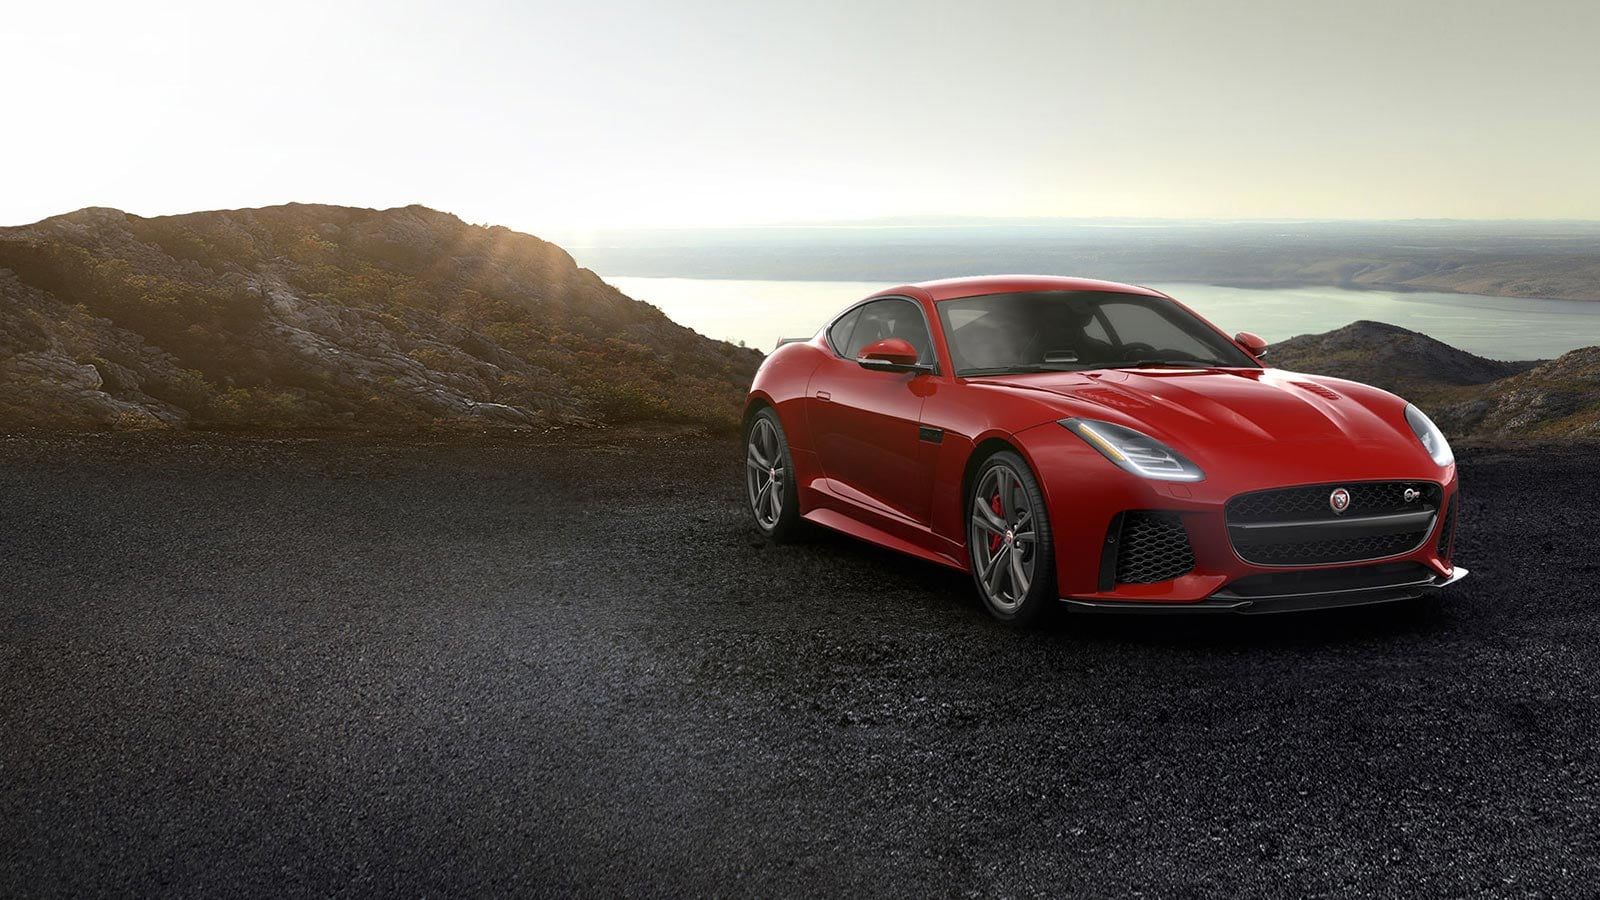 2020 Jaguar F-type R Review, Pricing, and Specs